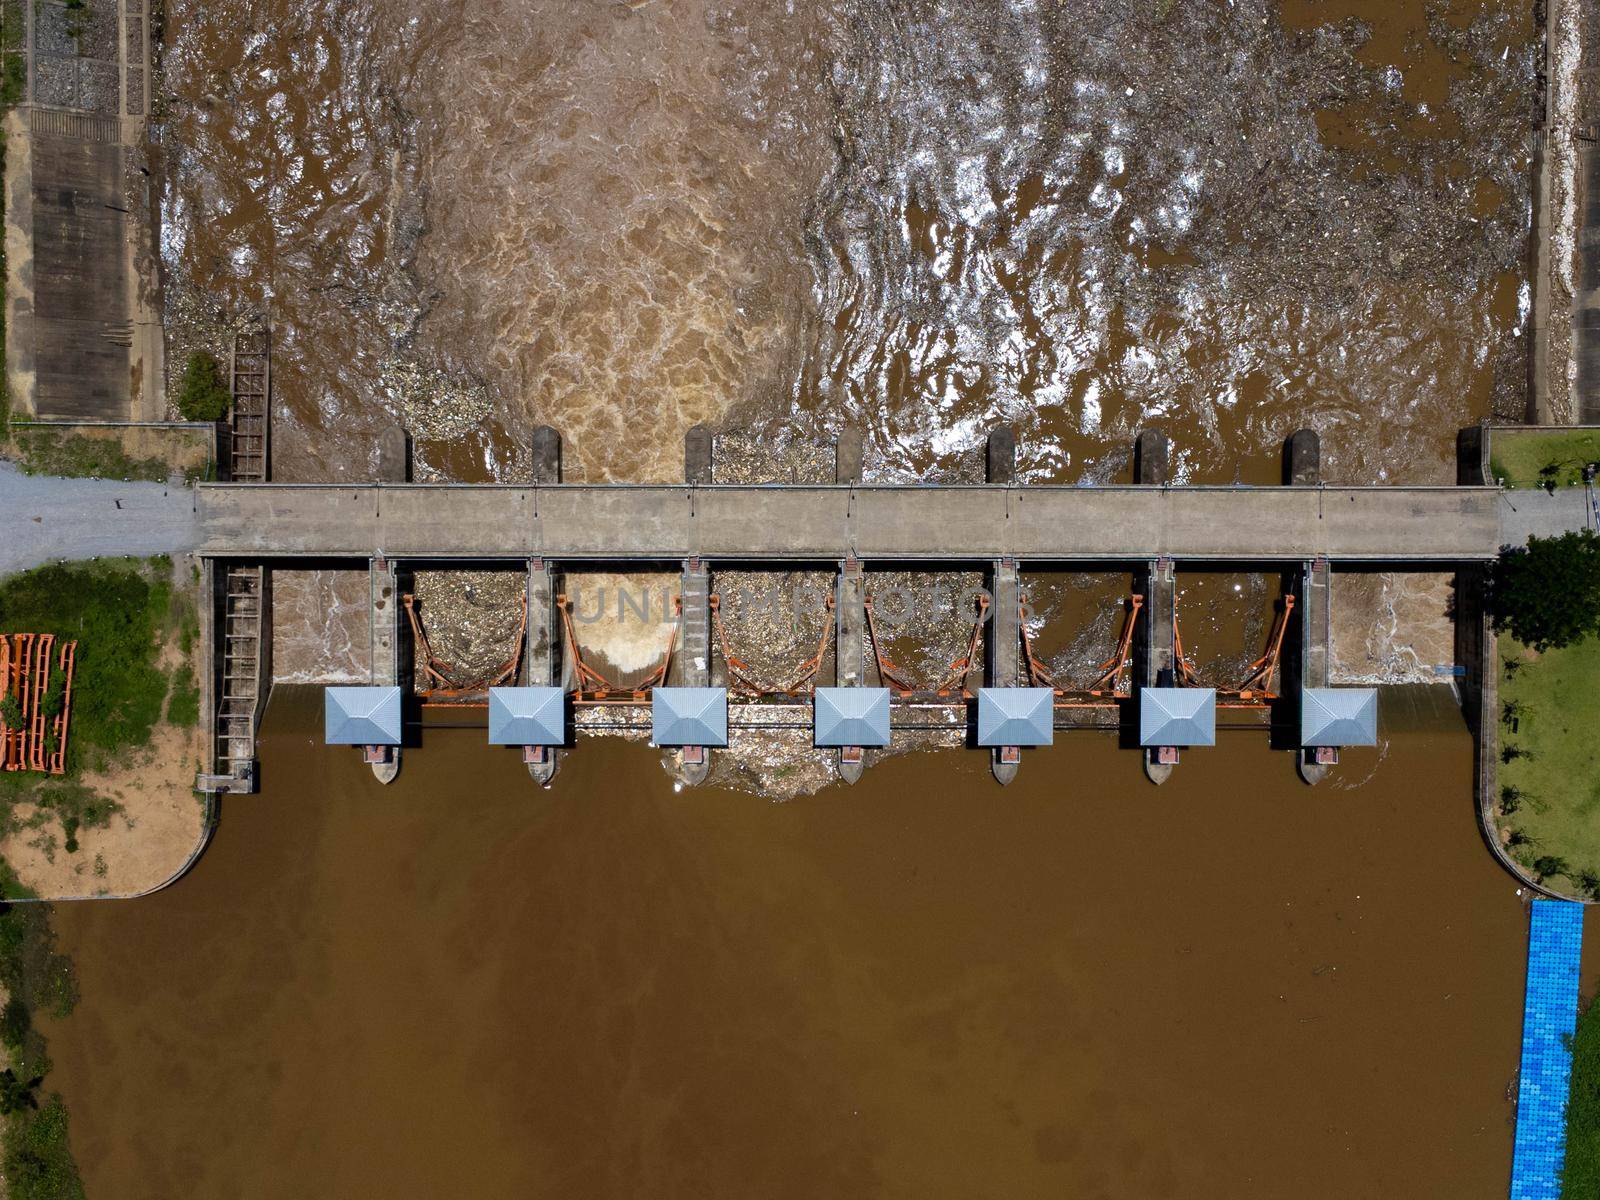 Aerial view of the water released from the concrete dam's drainage channel as the overflow in the rainy season. Top view of turbid brown forest water flows from a dam in rural northern Thailand.